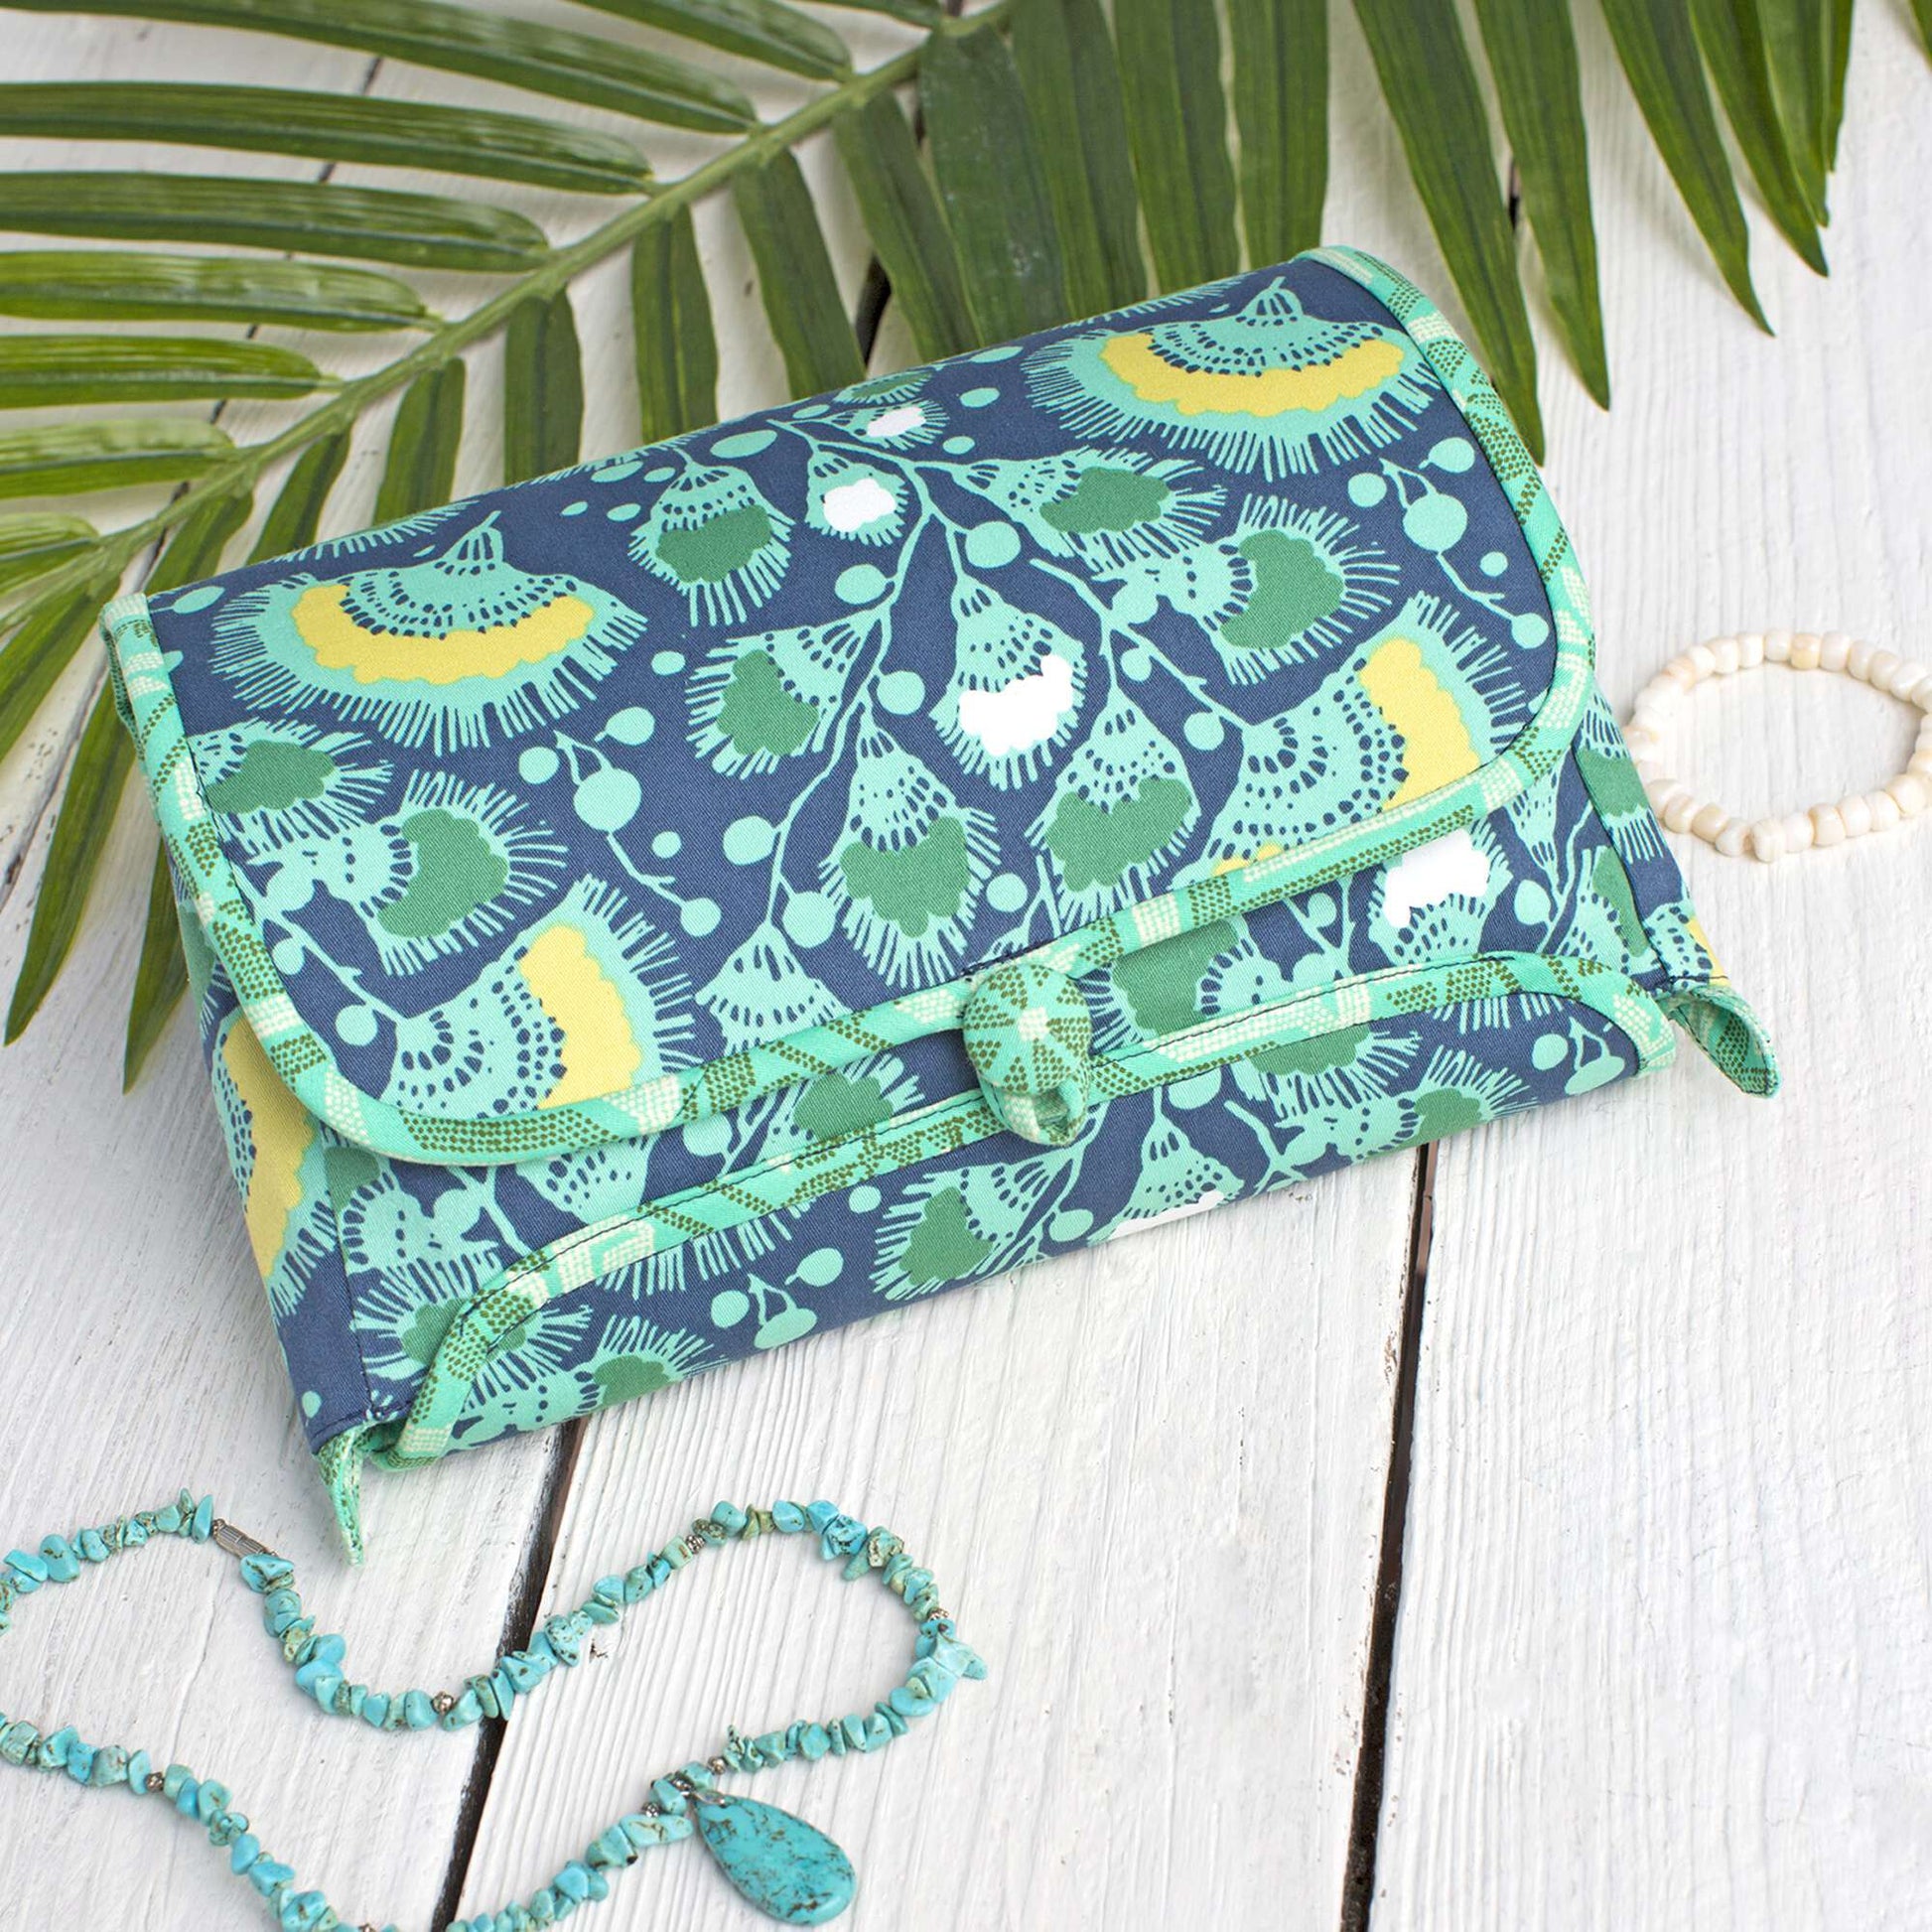 Free Coats & Clark Cosmetic Roll With Zipper Pouch Sewing Pattern